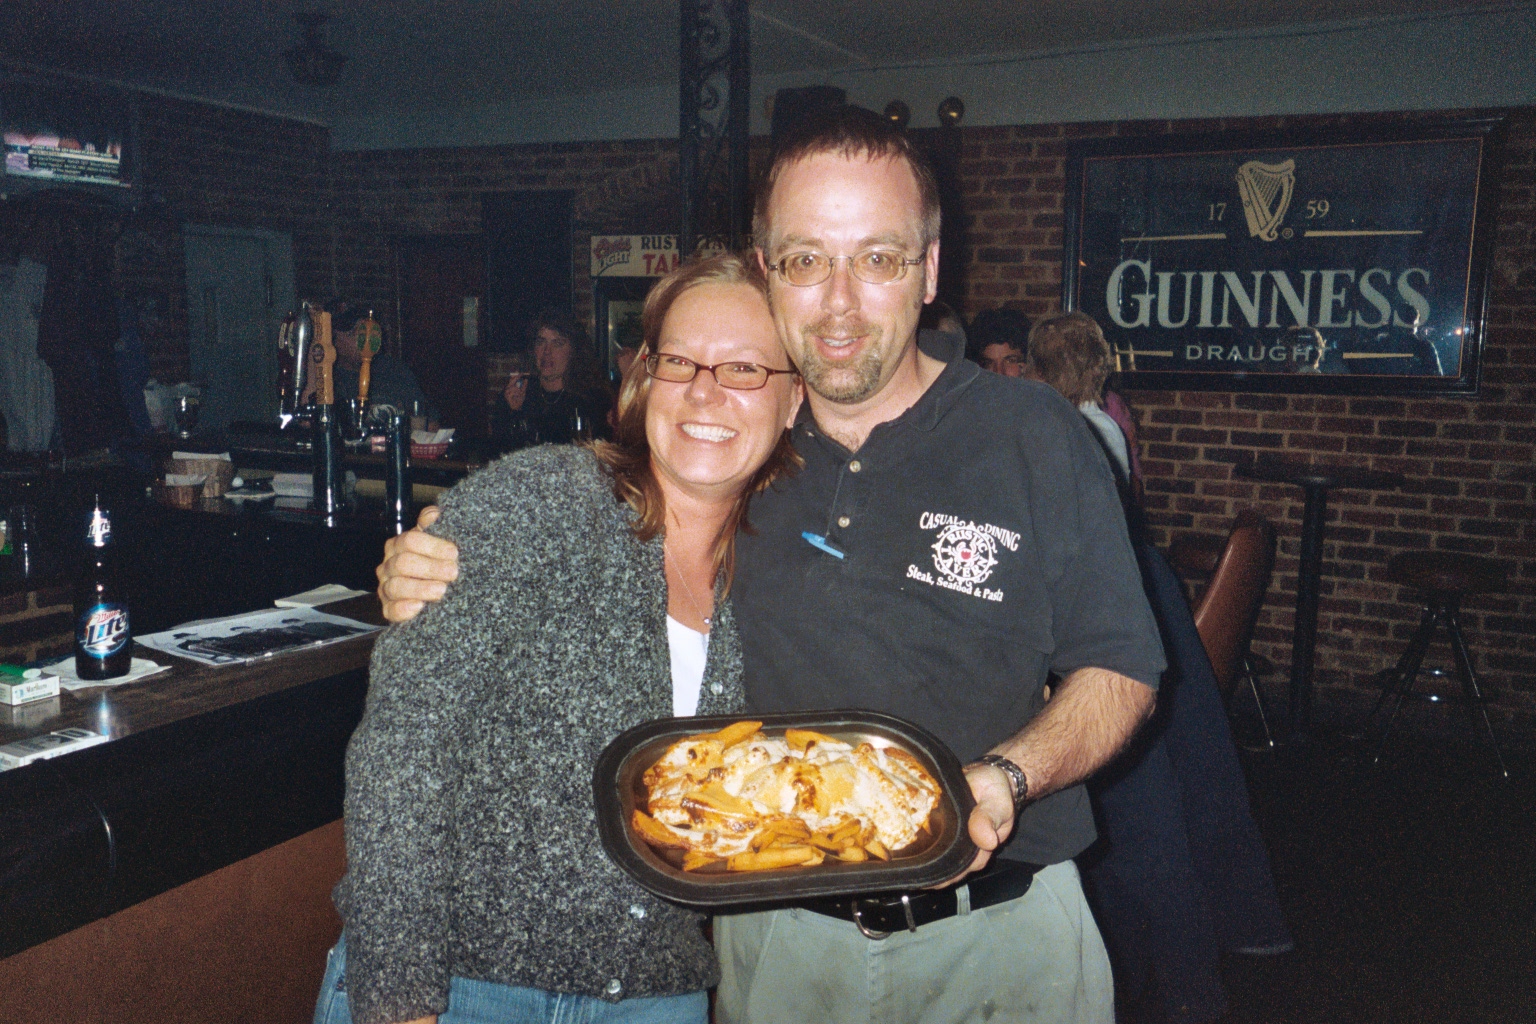 The Rustic Tavern
Bartender Jerry and new fan Lisa pose with some mouth watering fries...the music was hot too
